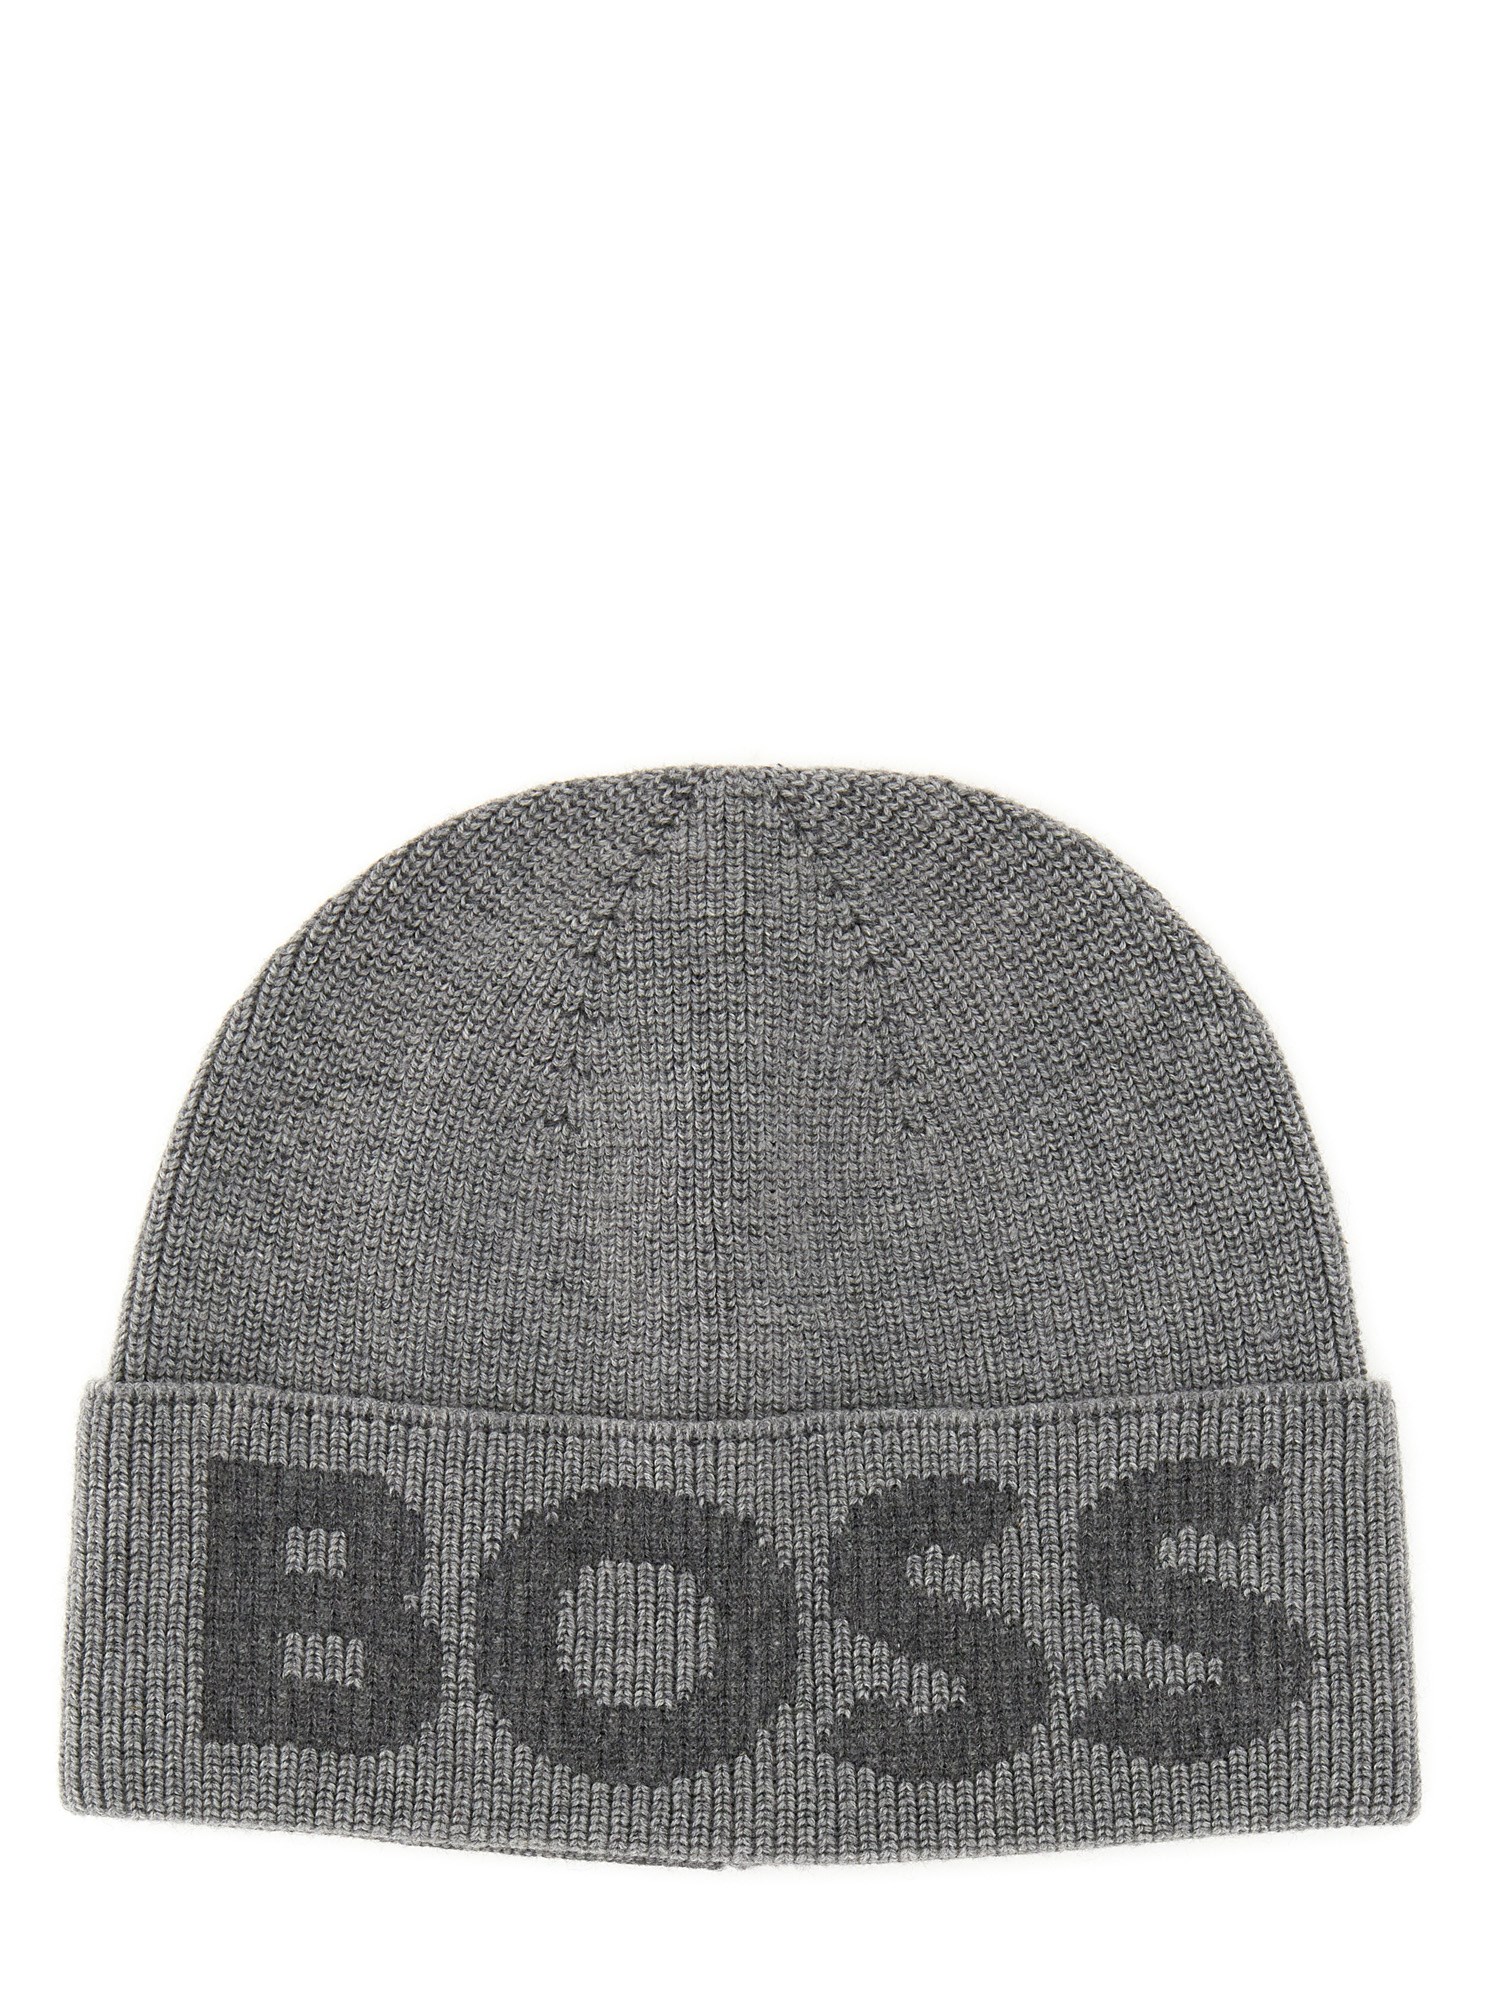 boss knit hat with logo